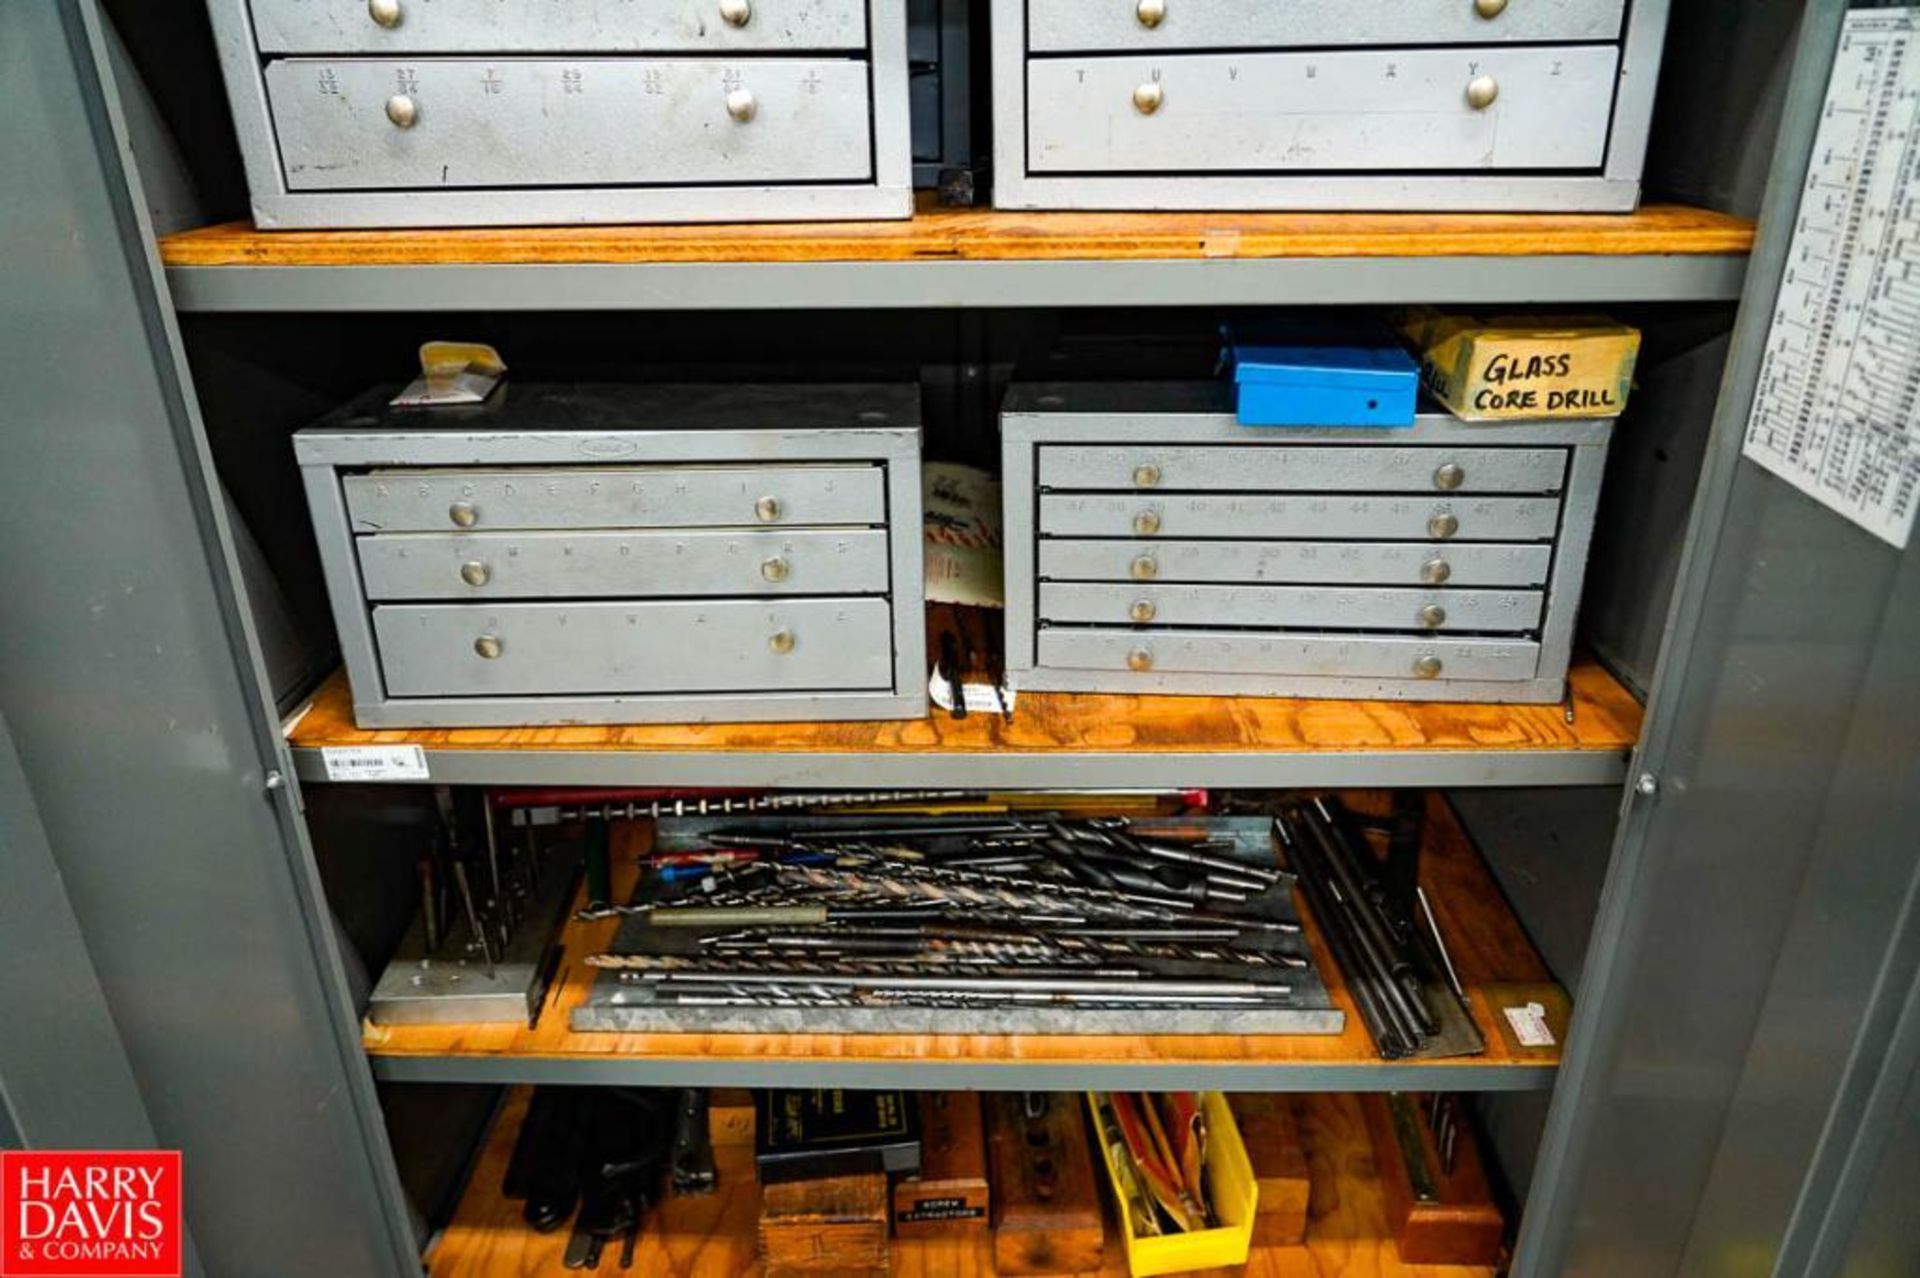 Contents of Tool Storage Crib 1 (3) 2 Door Metal Cabinet Filled with Lathe Tooling Bars, Collets, Dr - Image 22 of 24